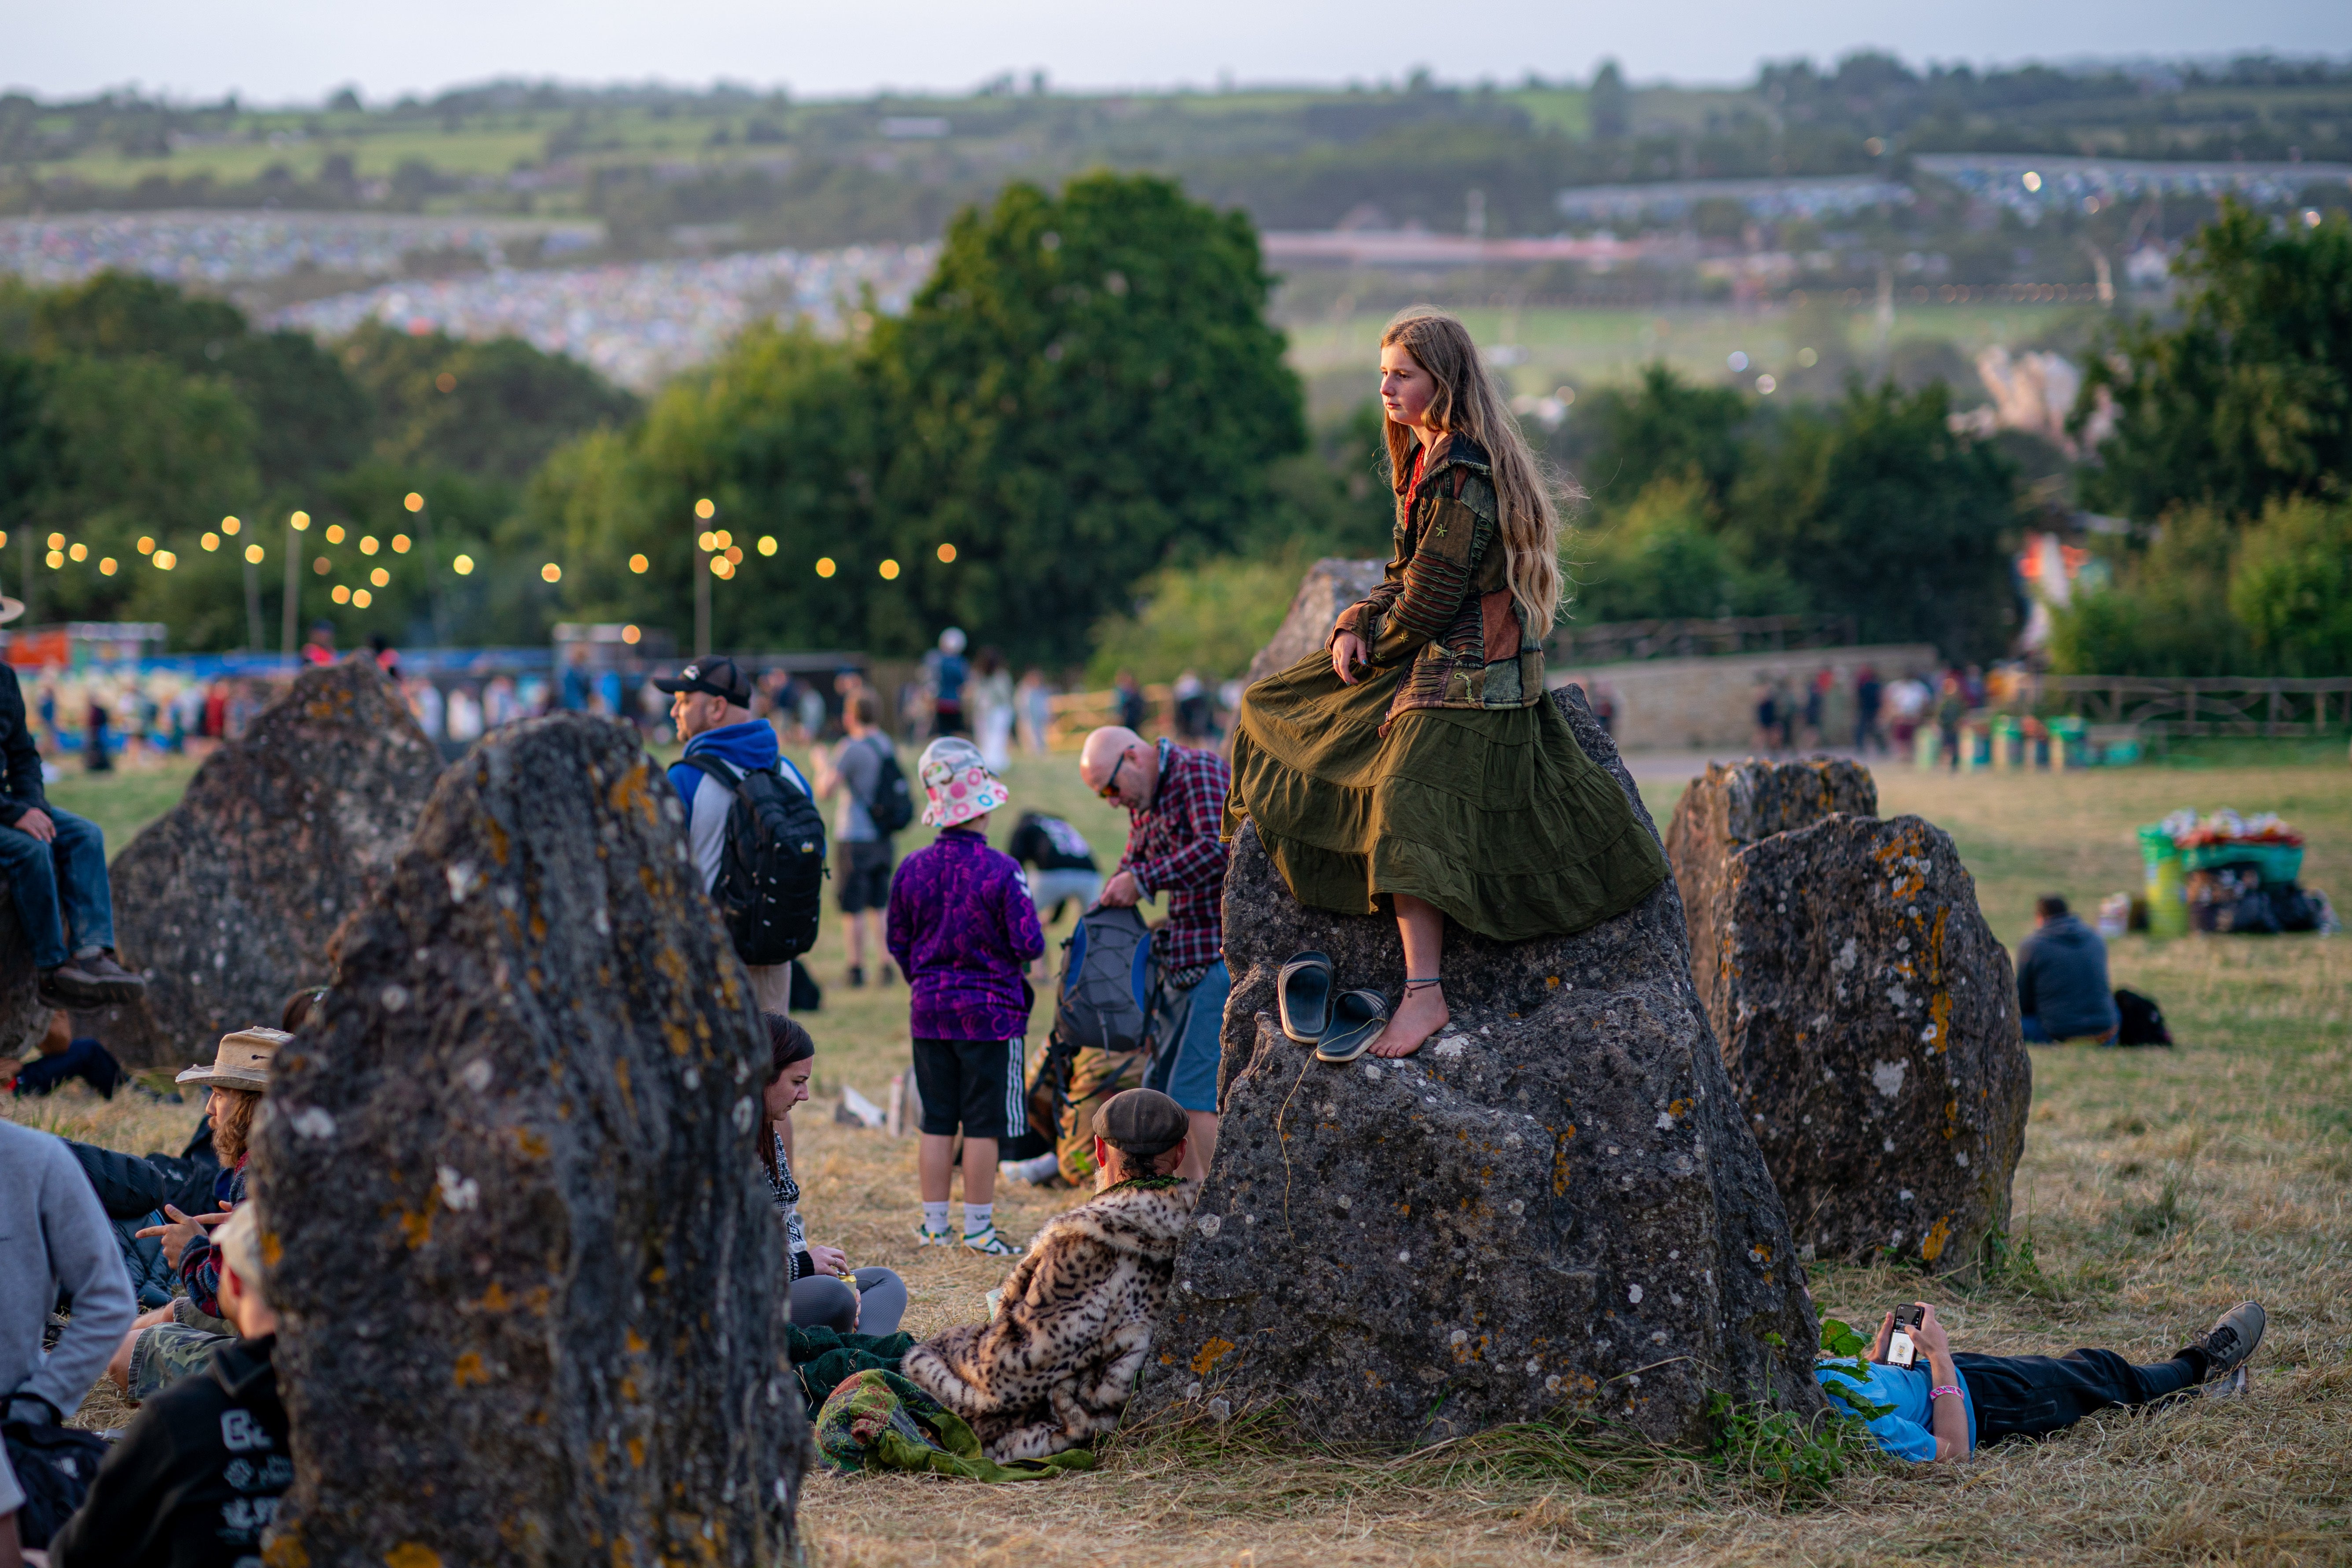 A person sits on the stone circle at the Glastonbury Festival (Ben Birchall/PA)